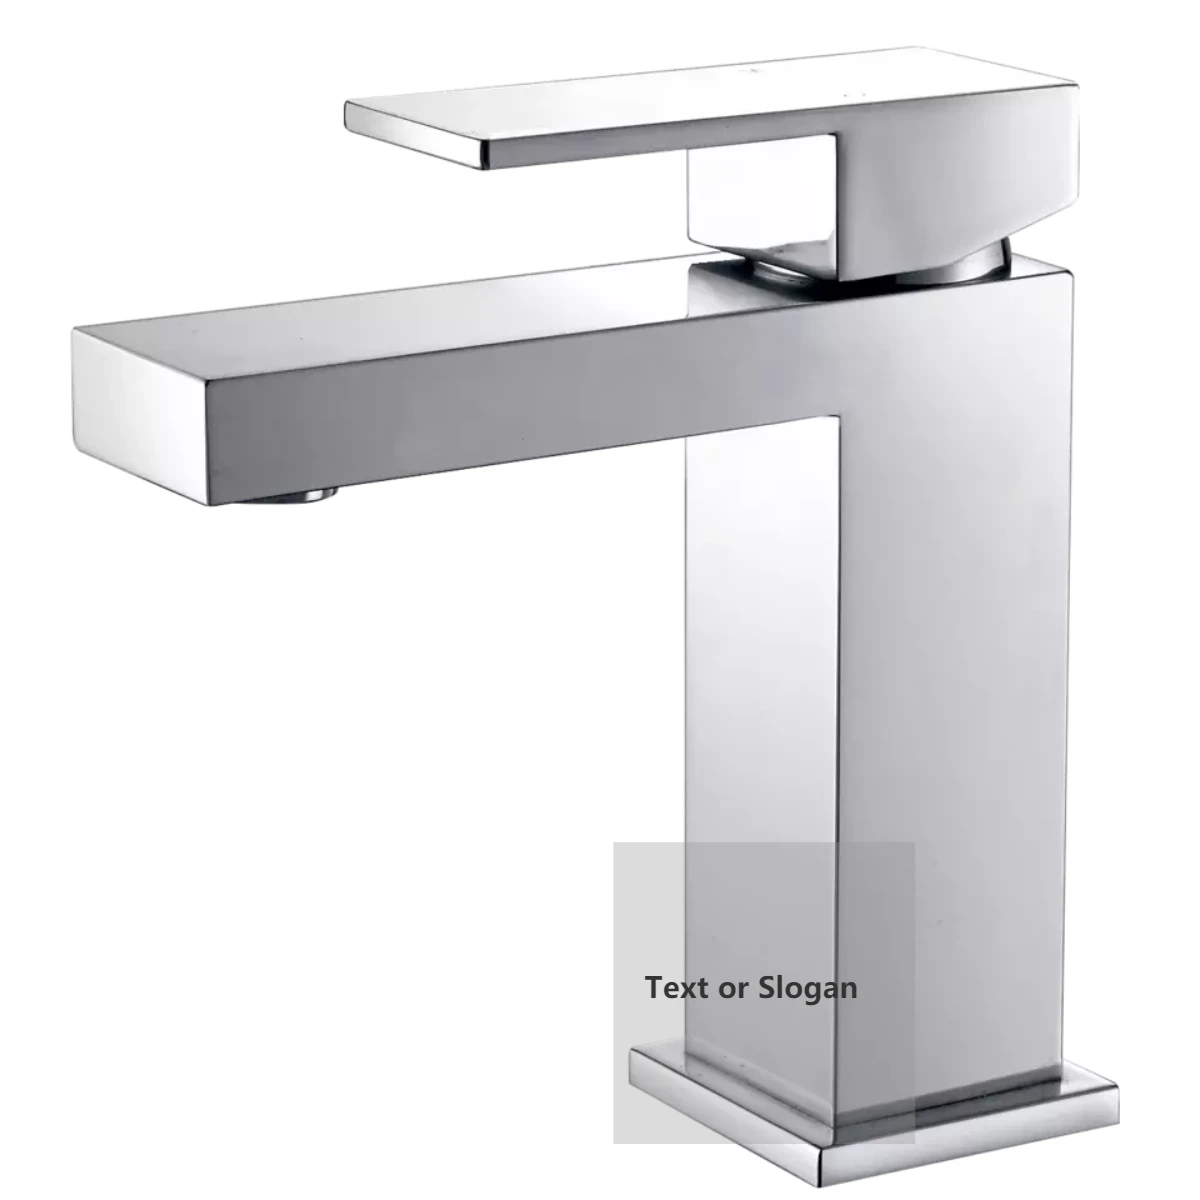 Aquacubic cheap Watersense Cupc Certified Square Solid Brass Chrome Plated Bathroom Basin Faucet Tap